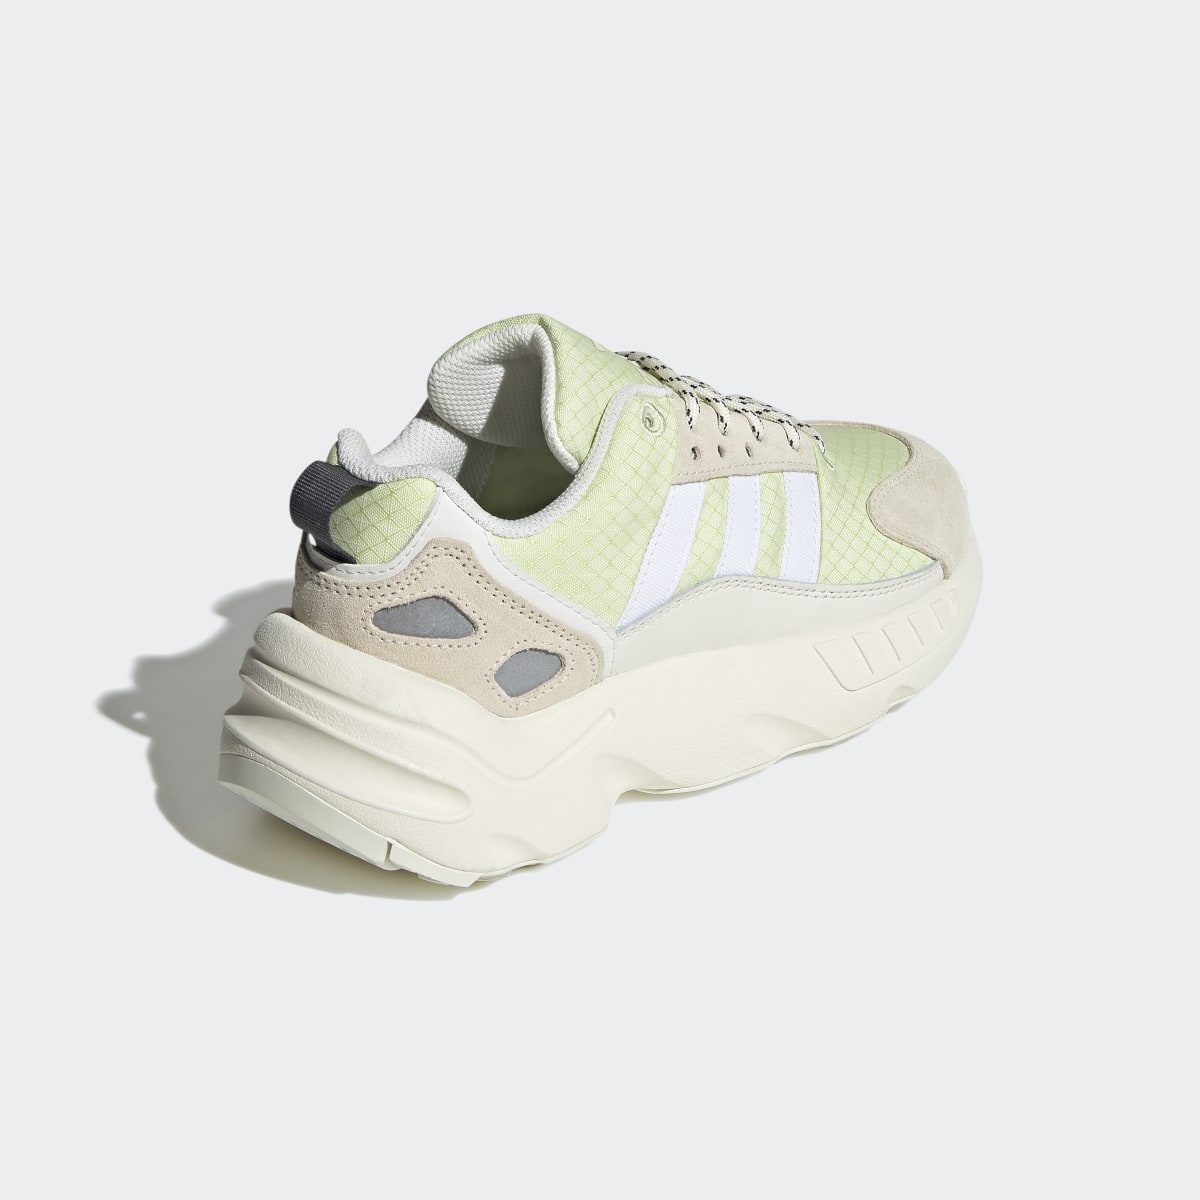 Adidas ZX 22 Shoes. 6